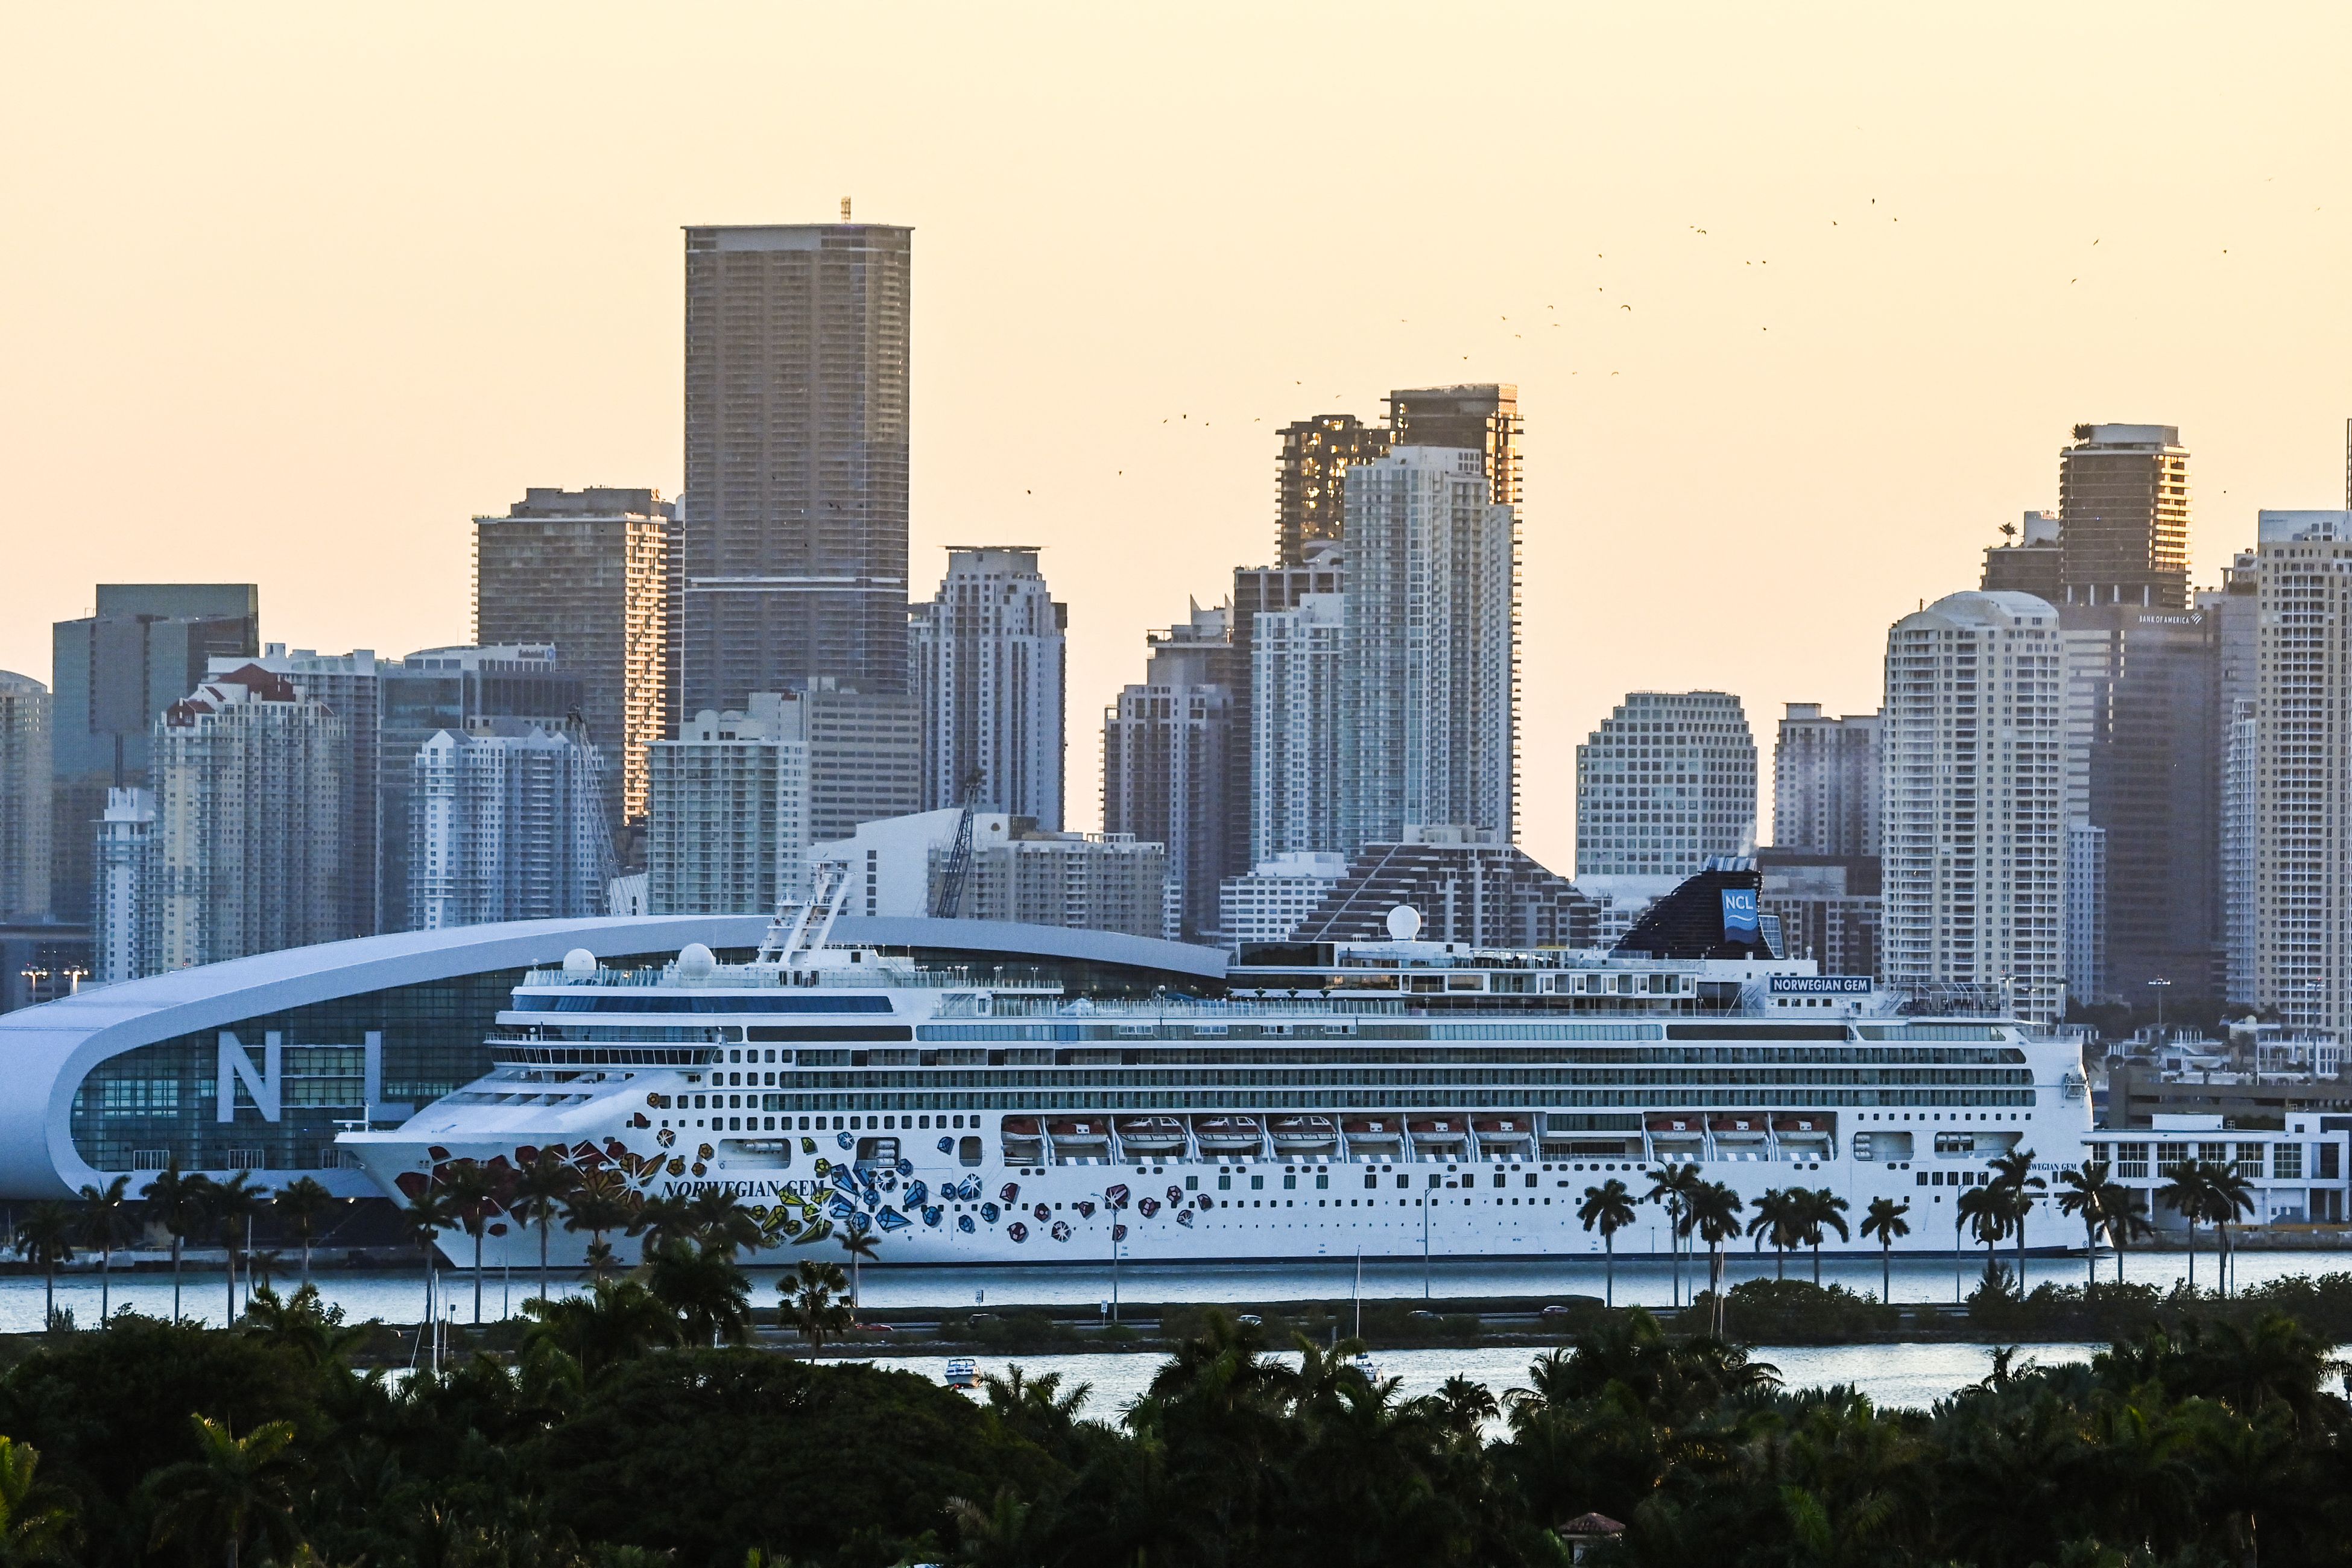 File: Norwegian Gem cruise ship is seen at the Port of Miami